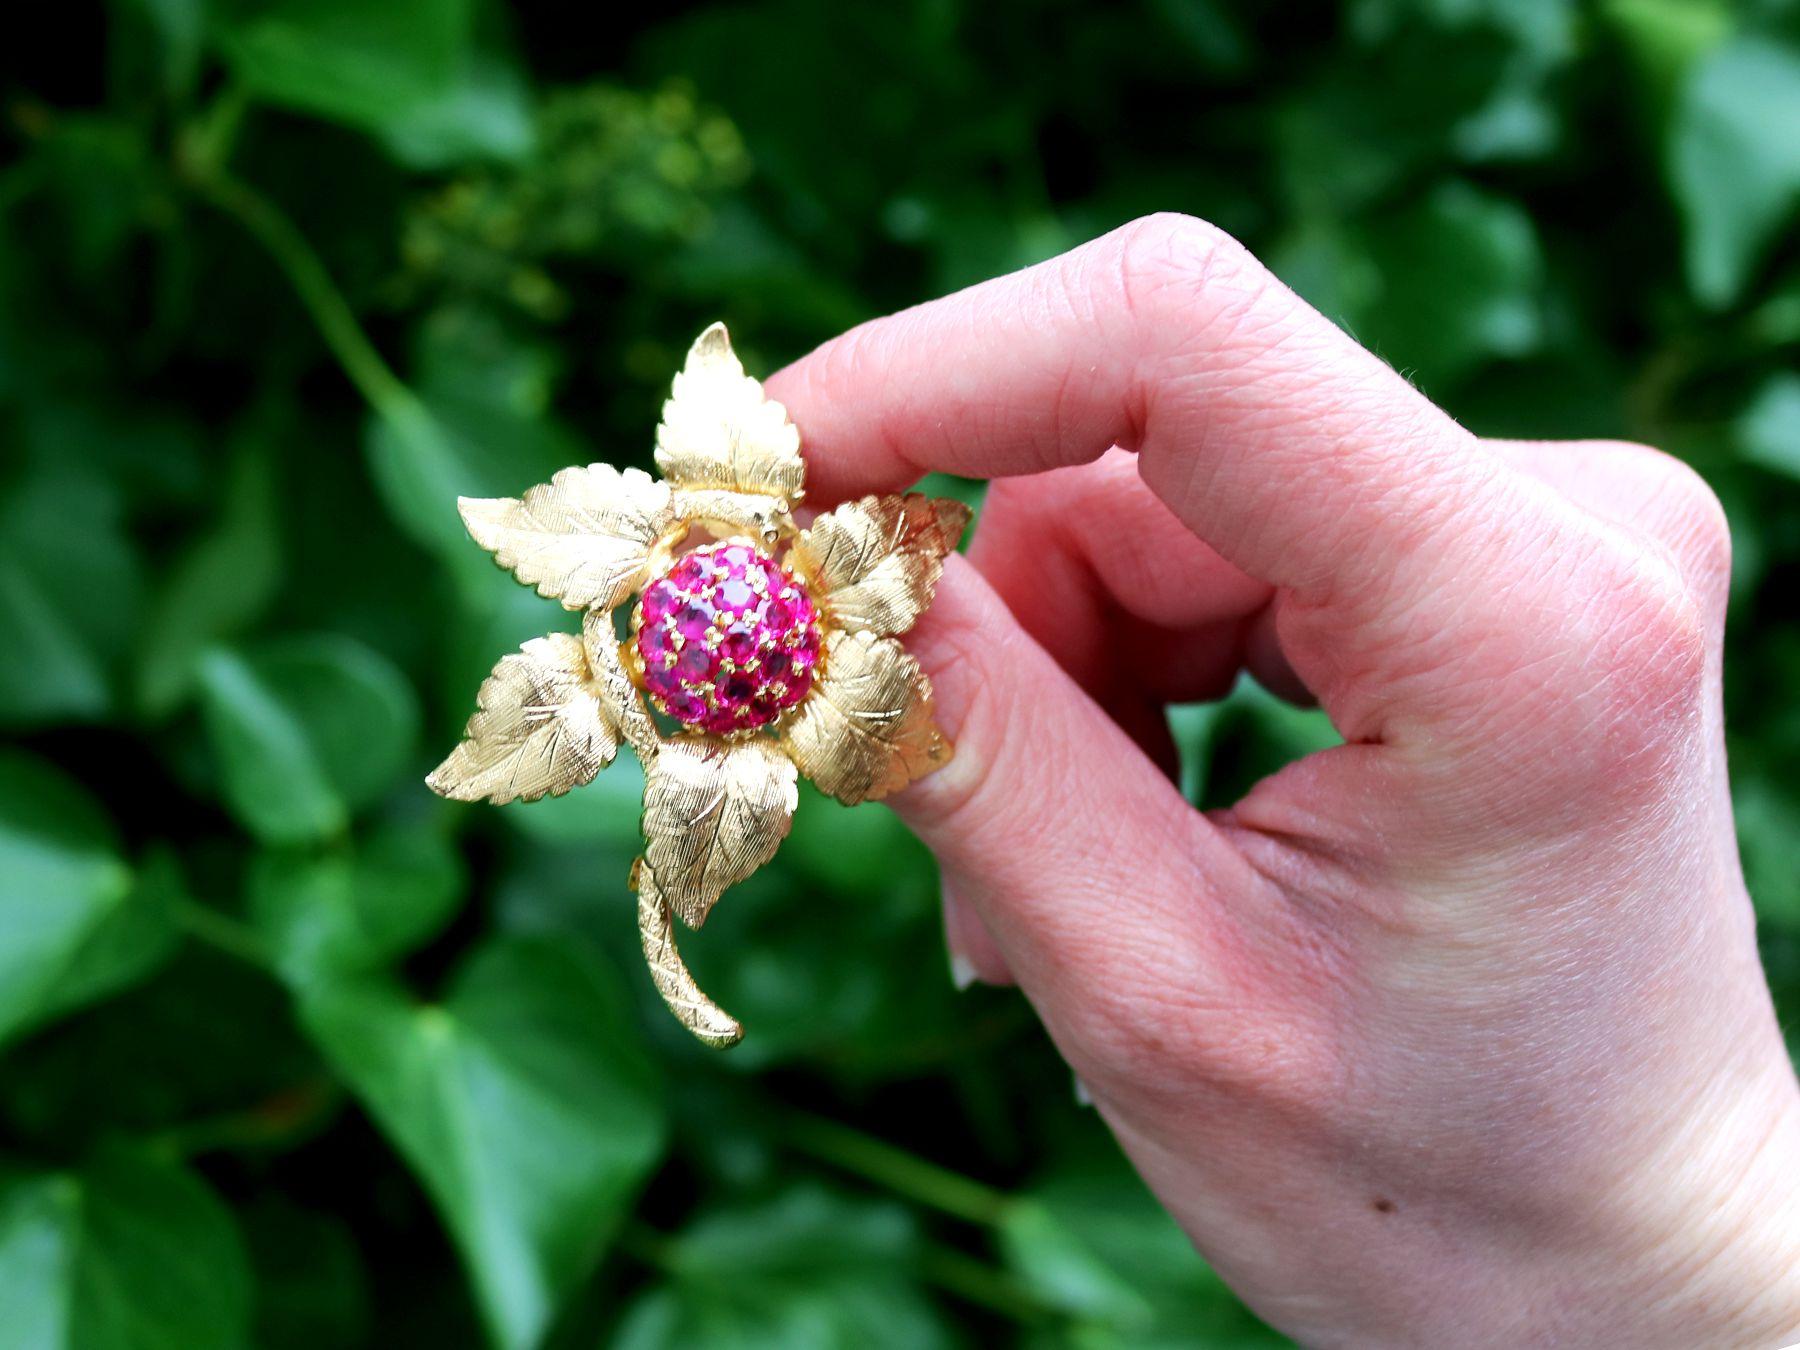 A stunning, fine and impressive vintage 1.83 carat Burmese ruby and 18 karat yellow gold floral brooch; part of our diverse vintage jewelry and estate jewelry collections

This stunning, fine and impressive 1990s vintage brooch has been crafted in